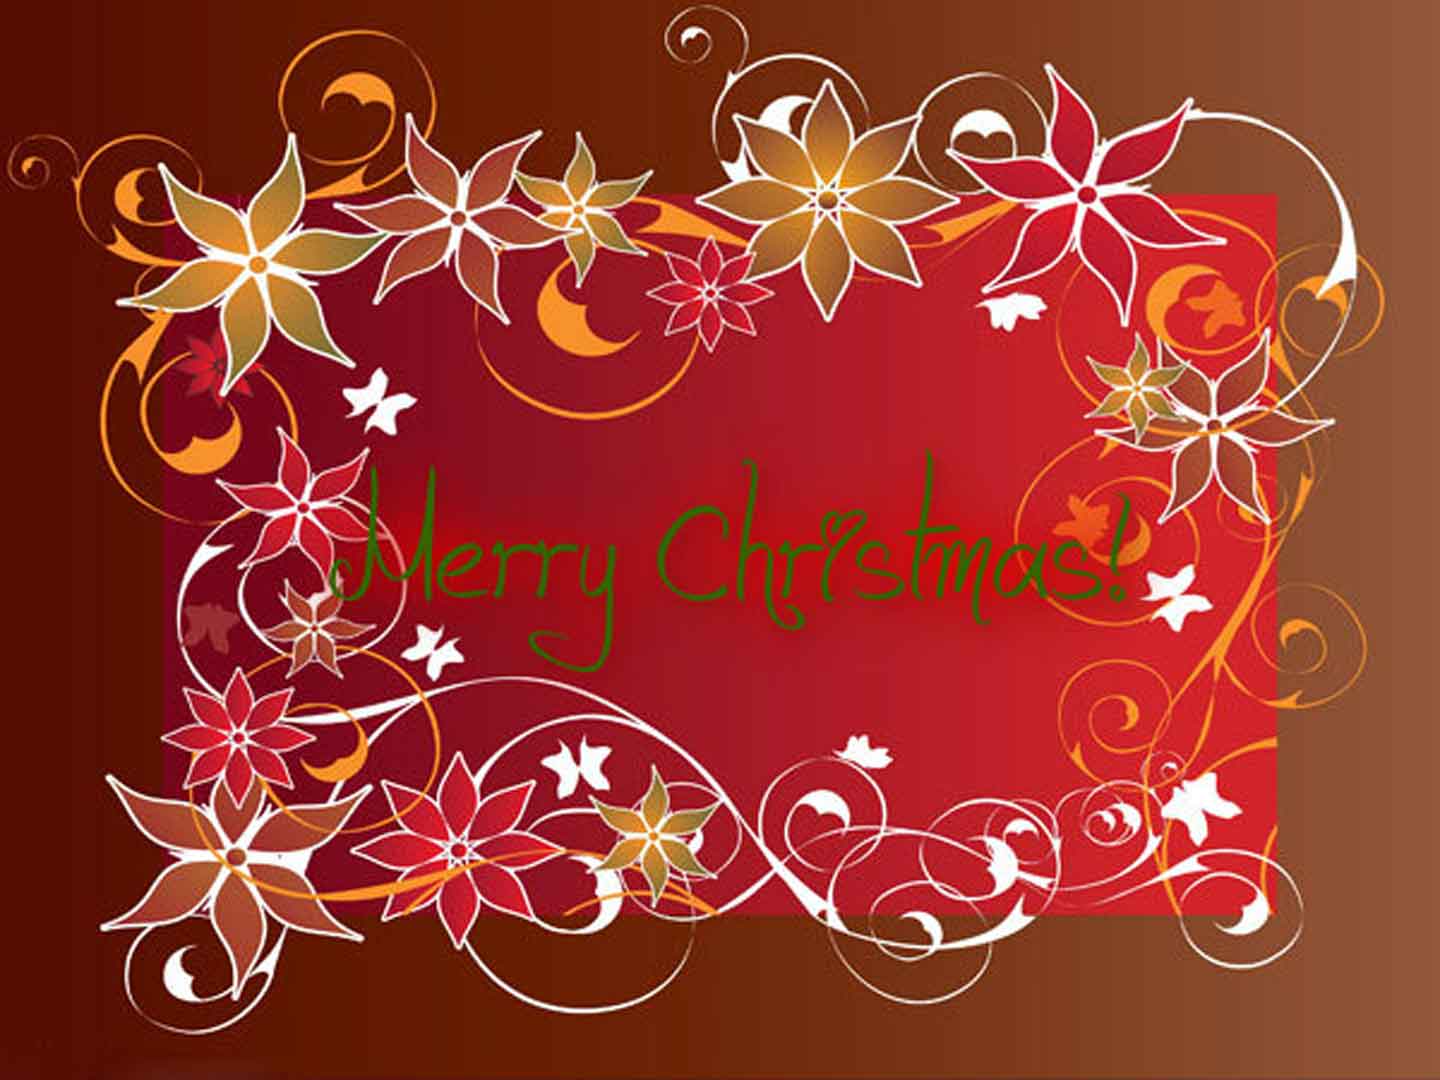 Christmas Cards 2012: Merry Christmas Greeting Cards Free 